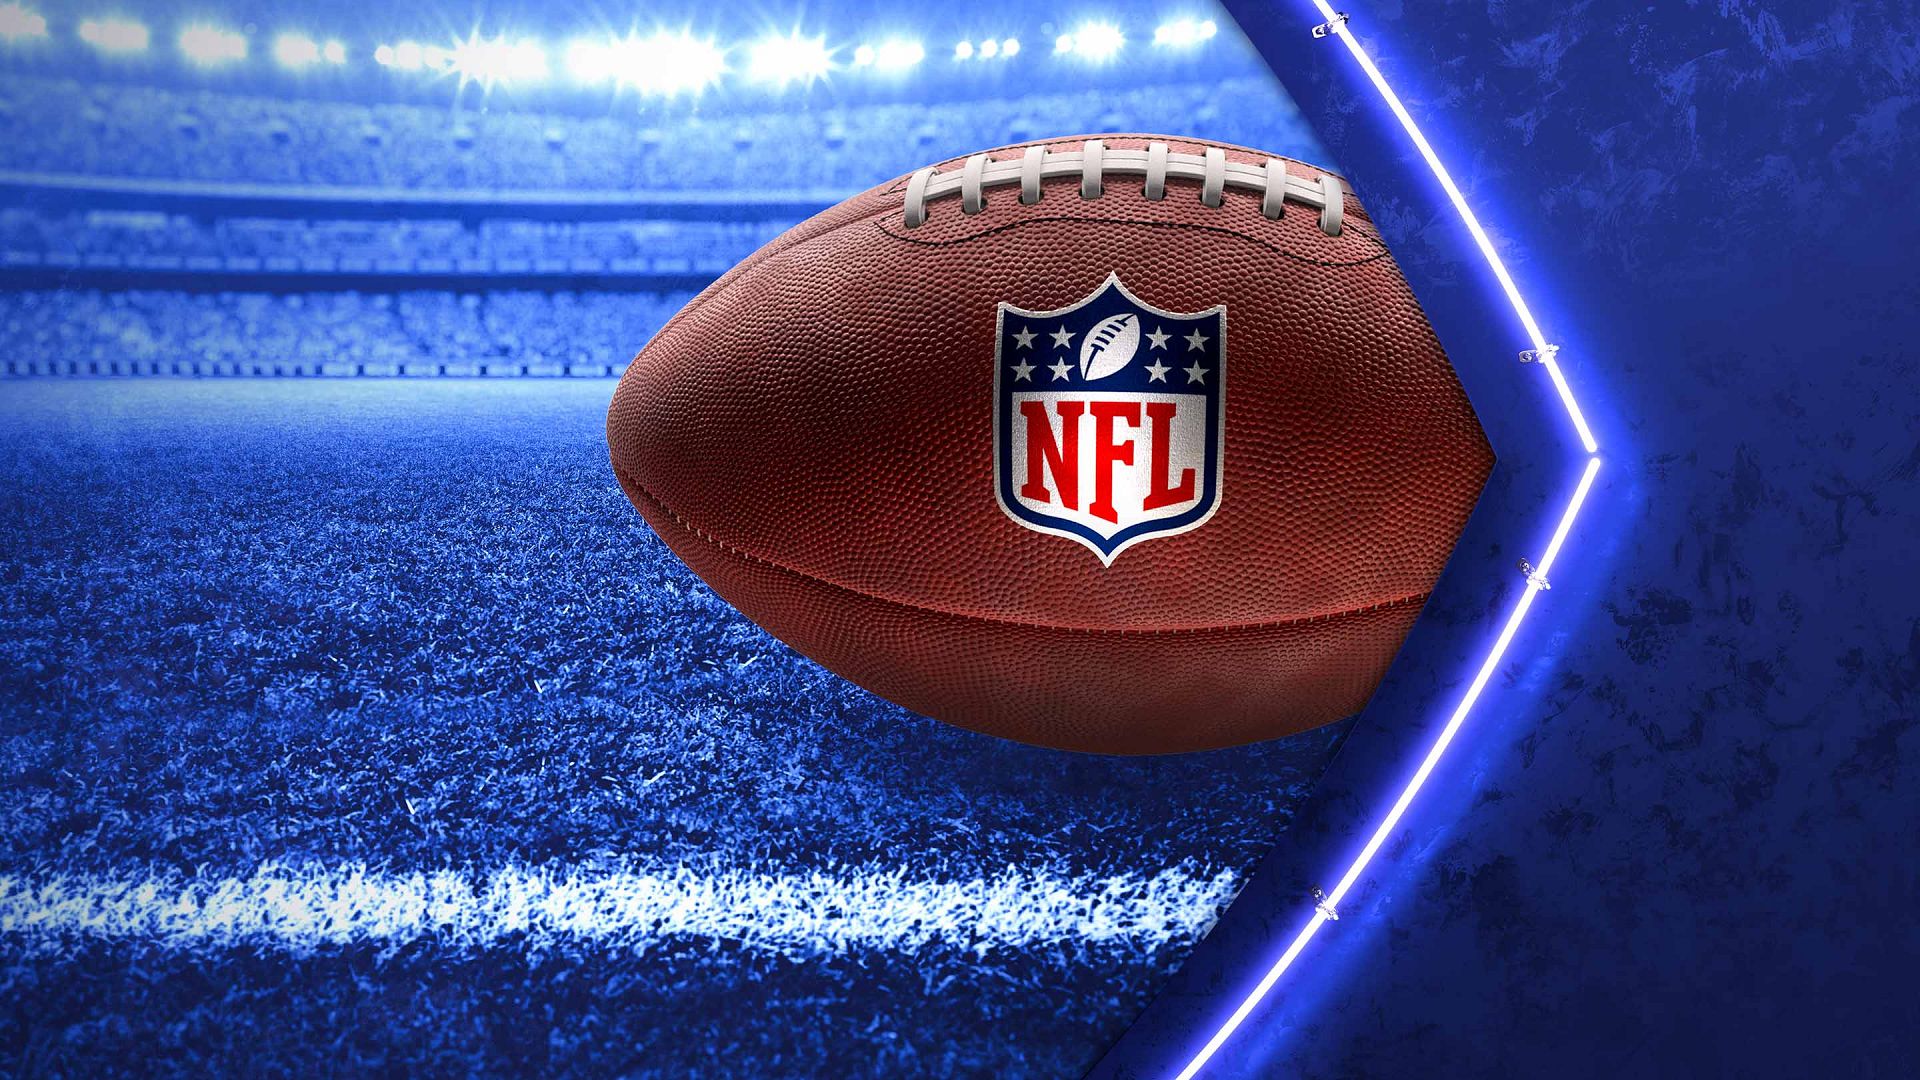 watch eagles cowboys game live